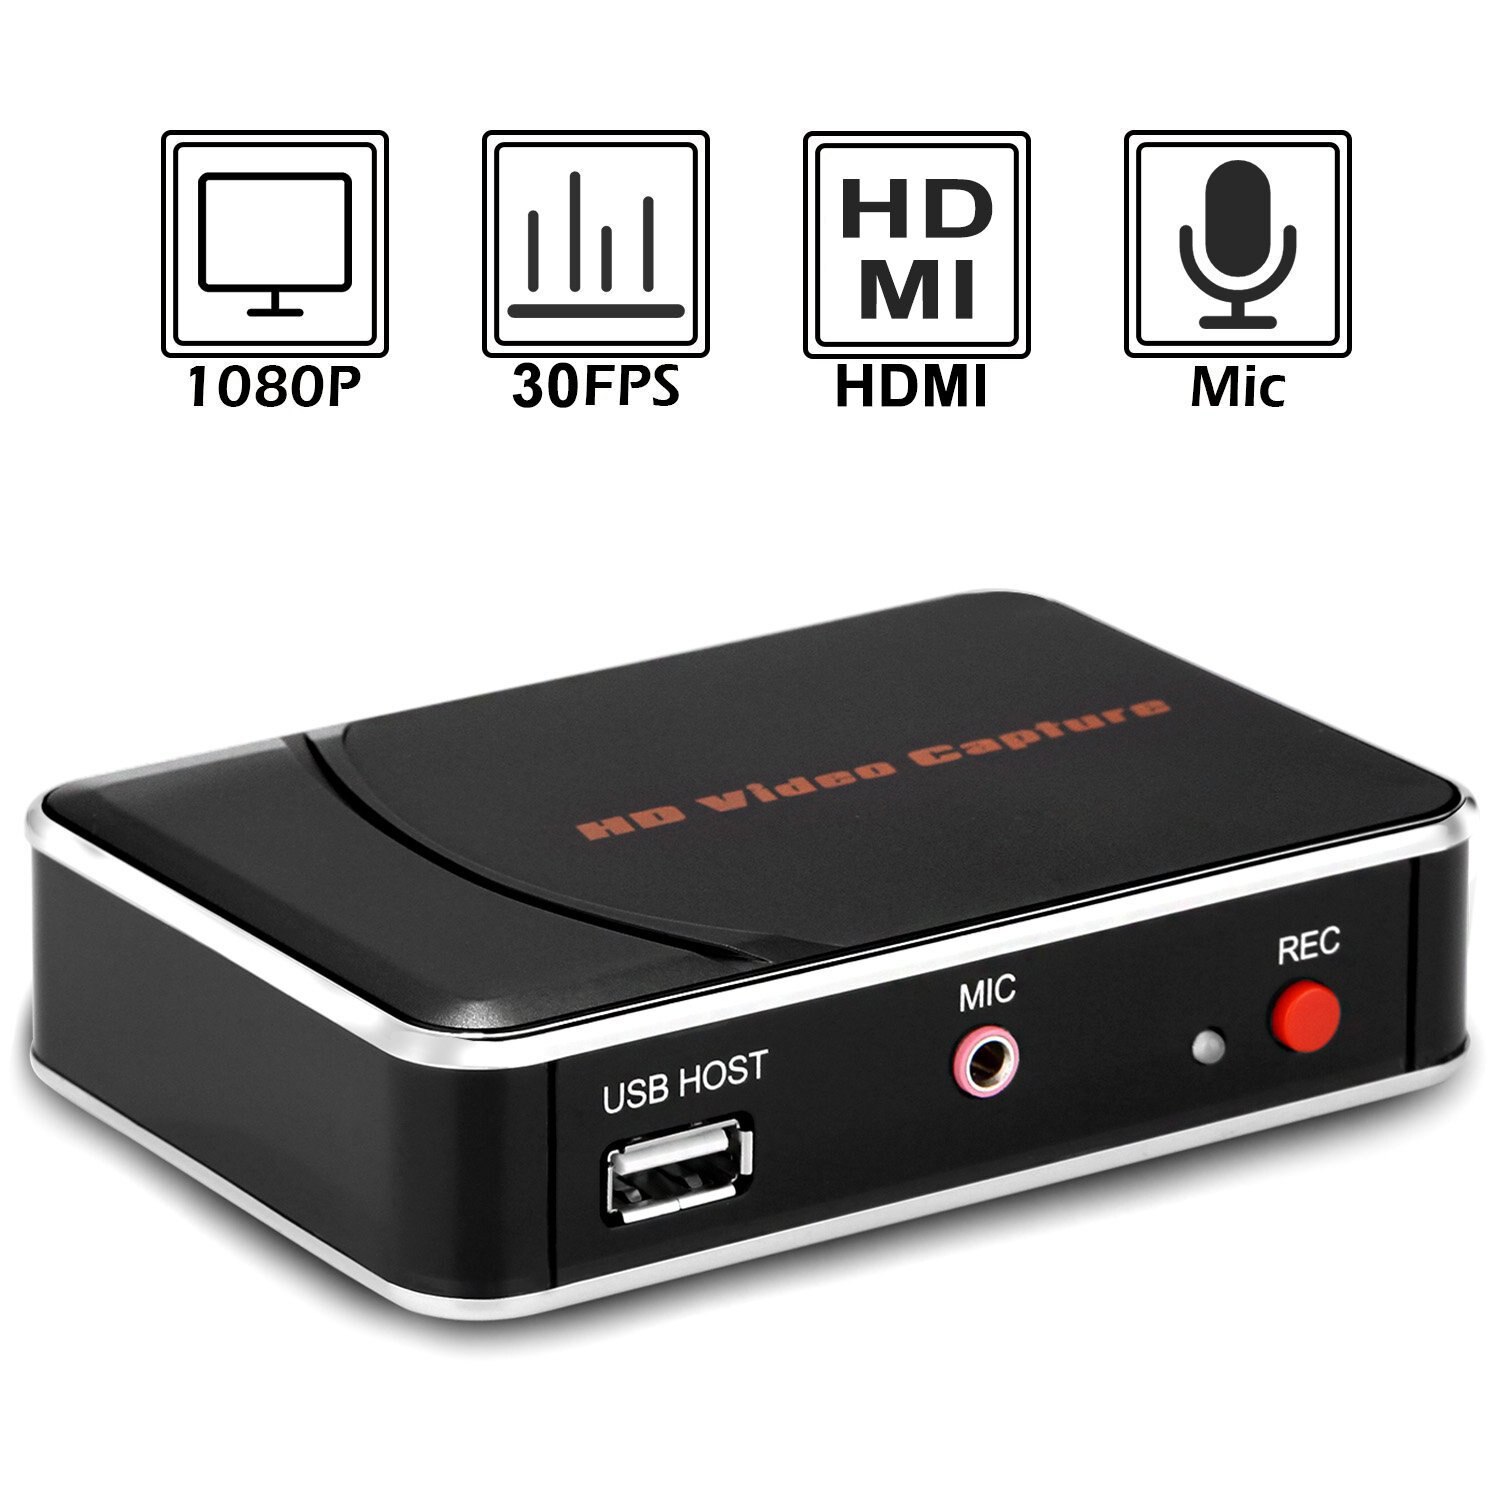 Hd Video Capture Card Hdmi Game Capture Met Microfoon In Voor Blue Ray/Set-Top Box/Computer/Game Box